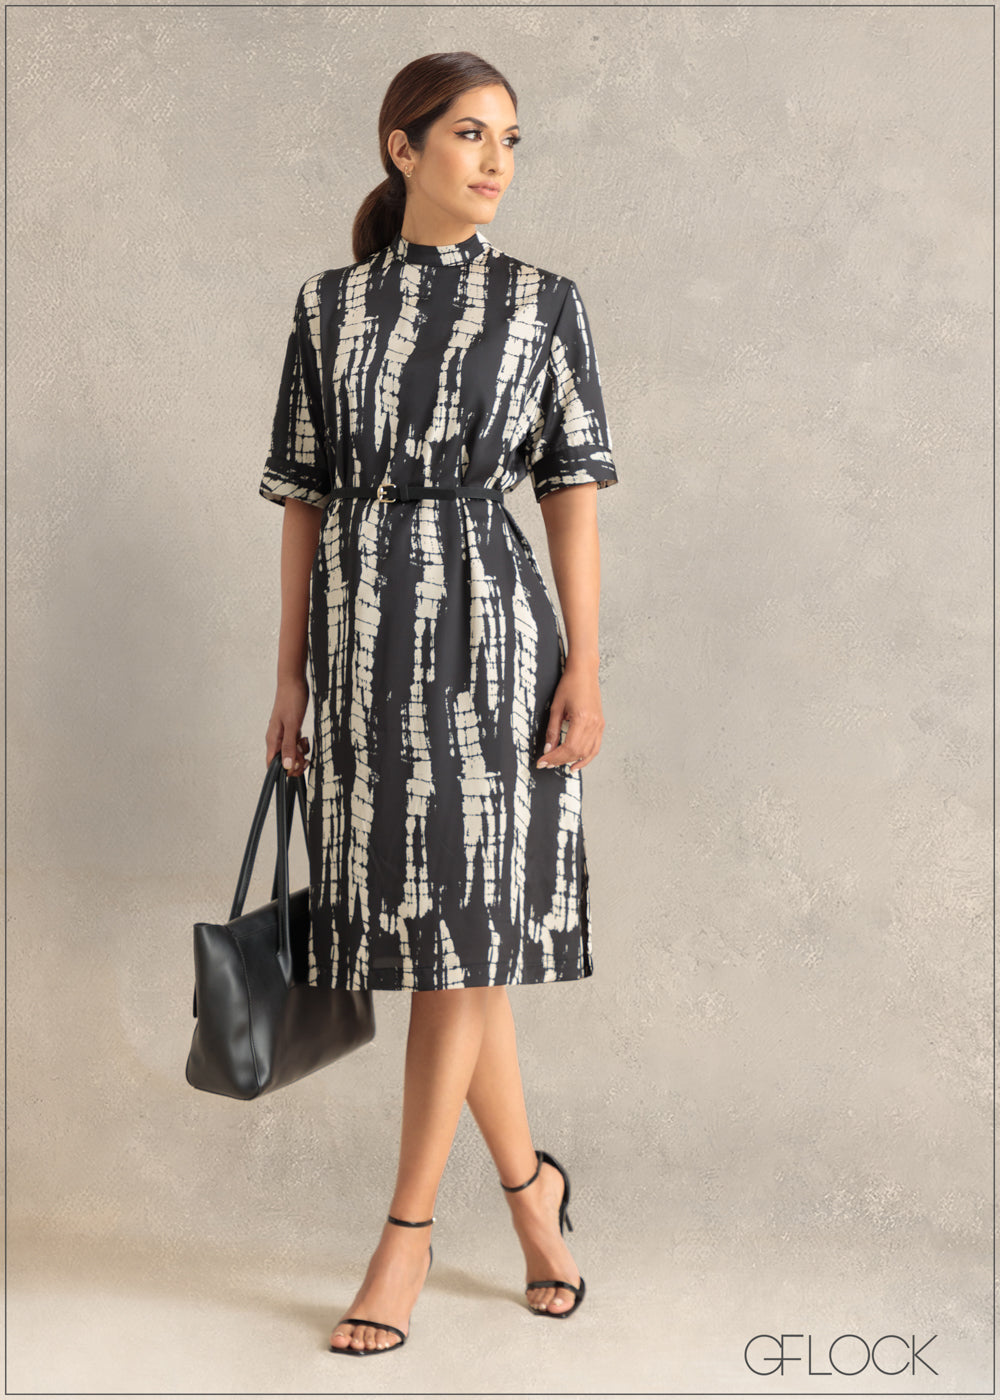 Printed Over-Sized Dress - 241123